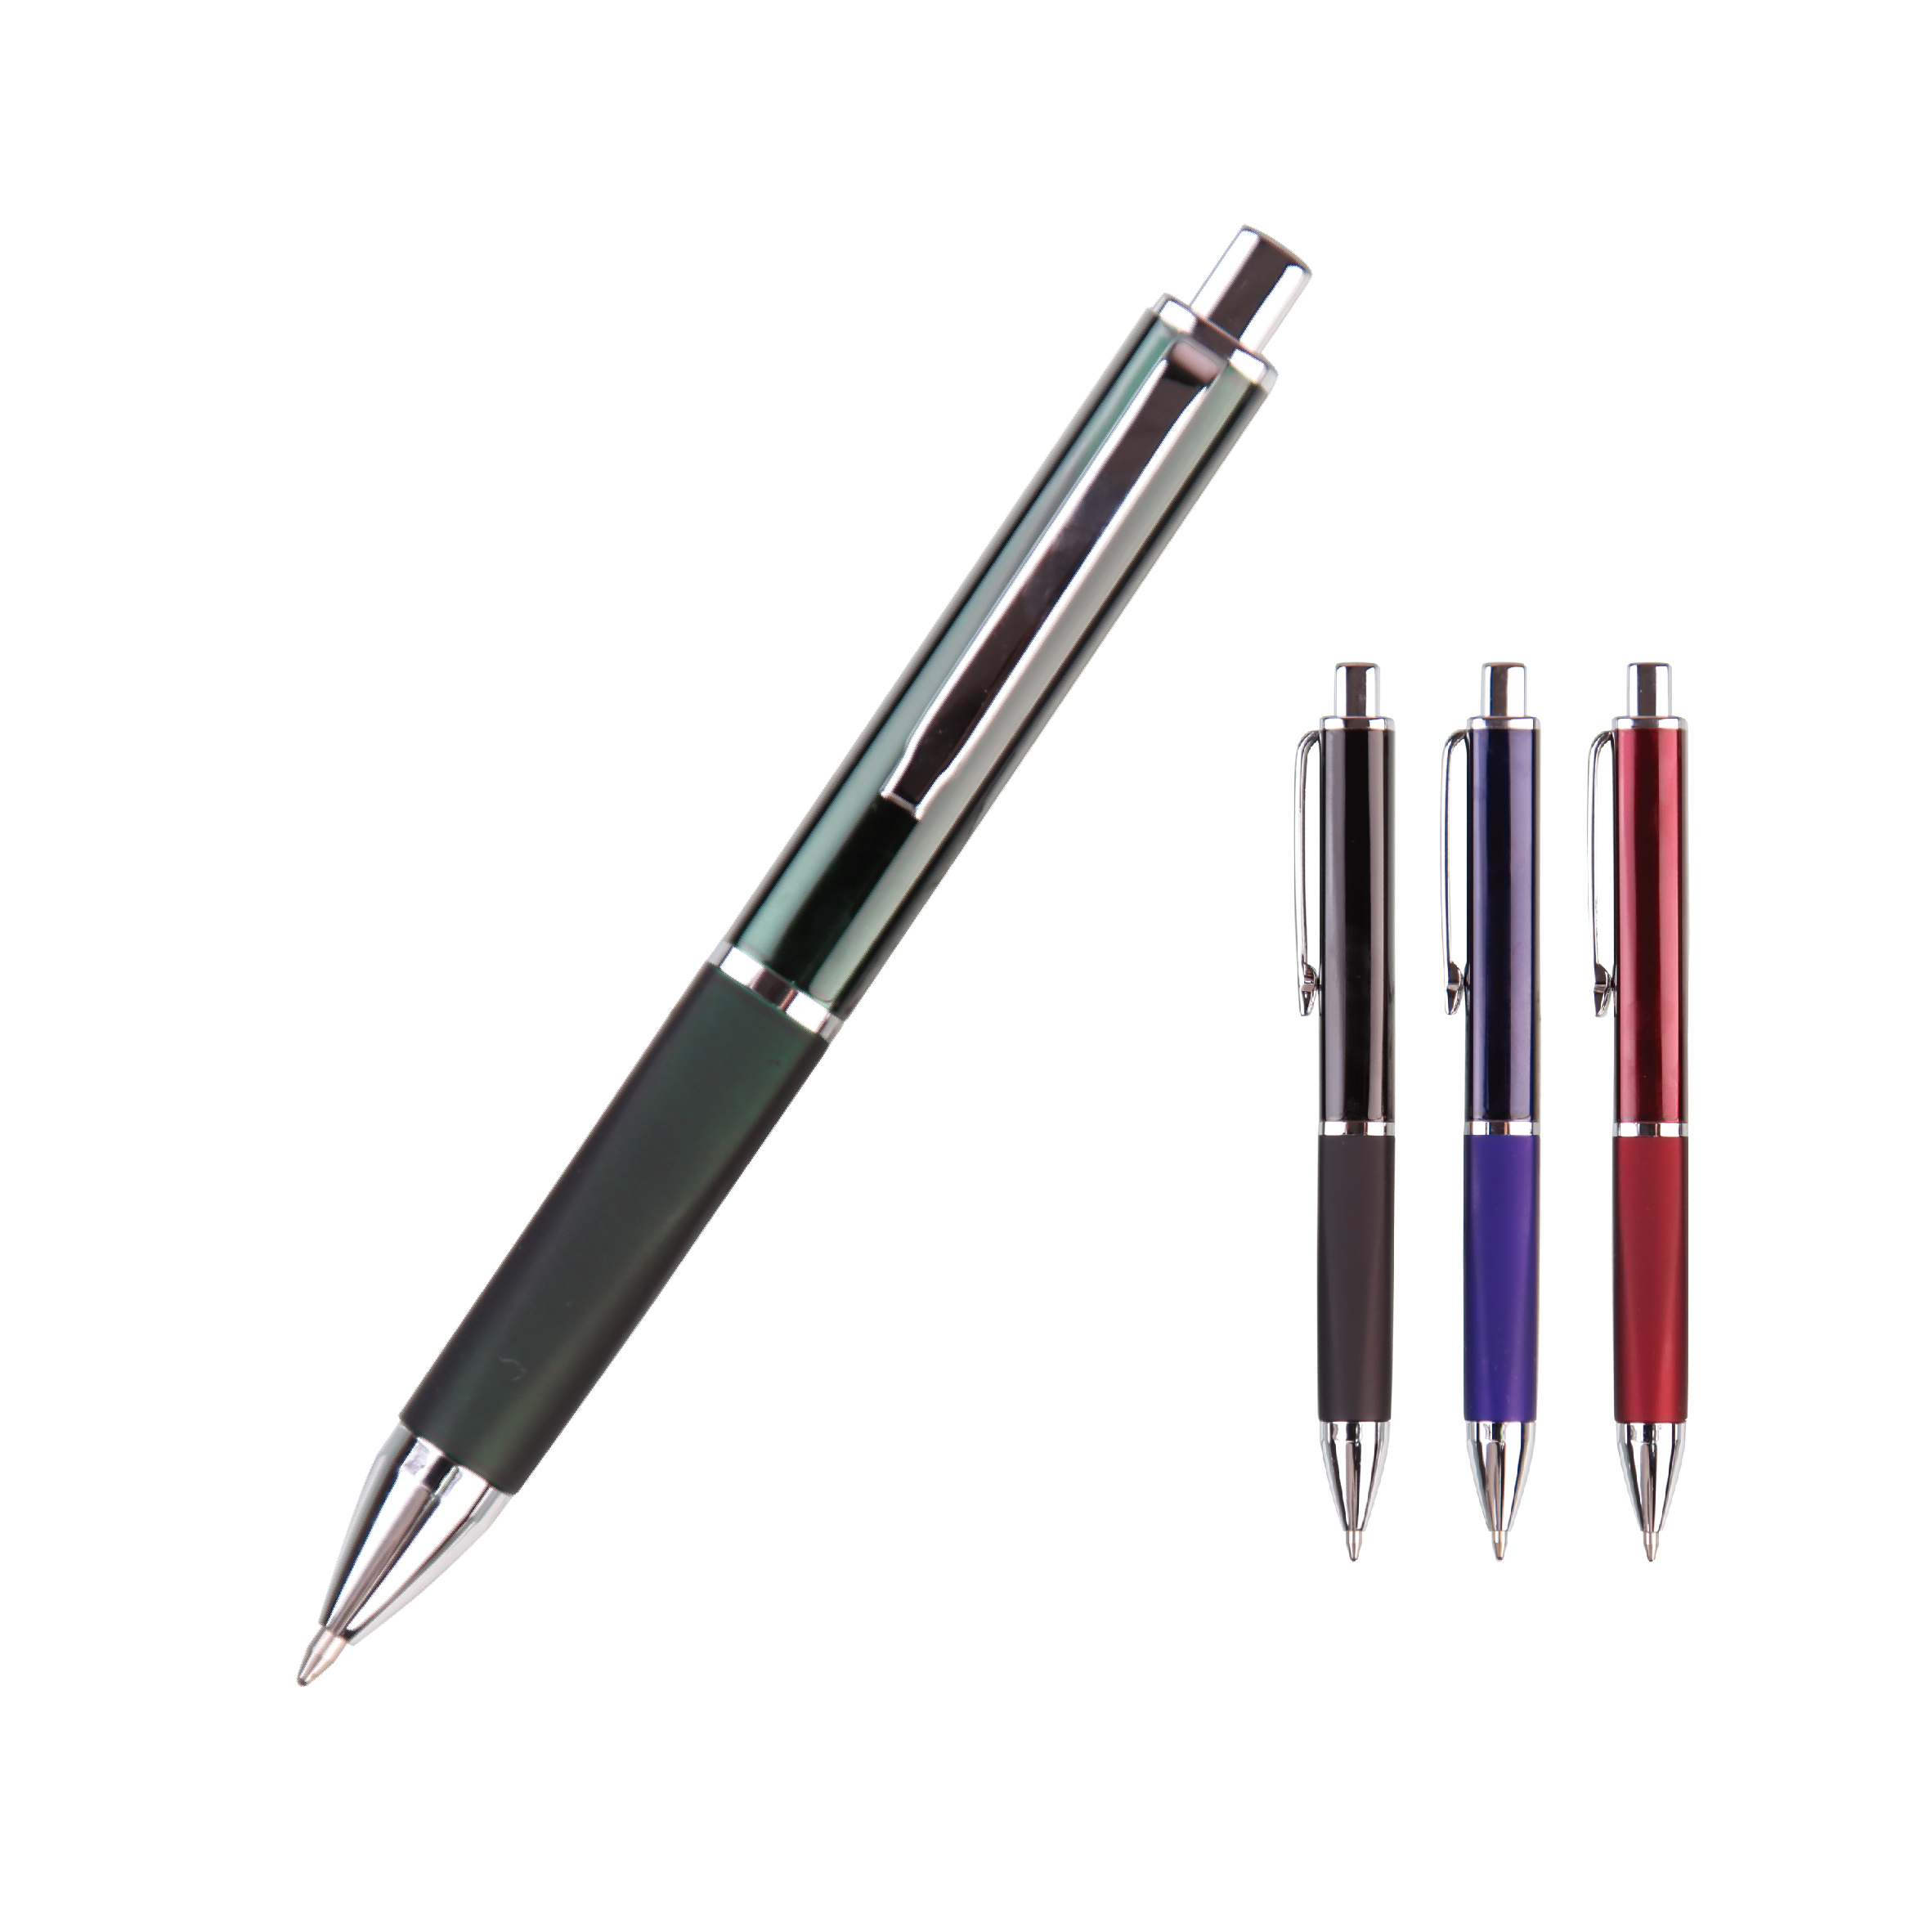 0.7mm/1.0mm Retractable Square Ball Metal Pen With Rubberized Grip